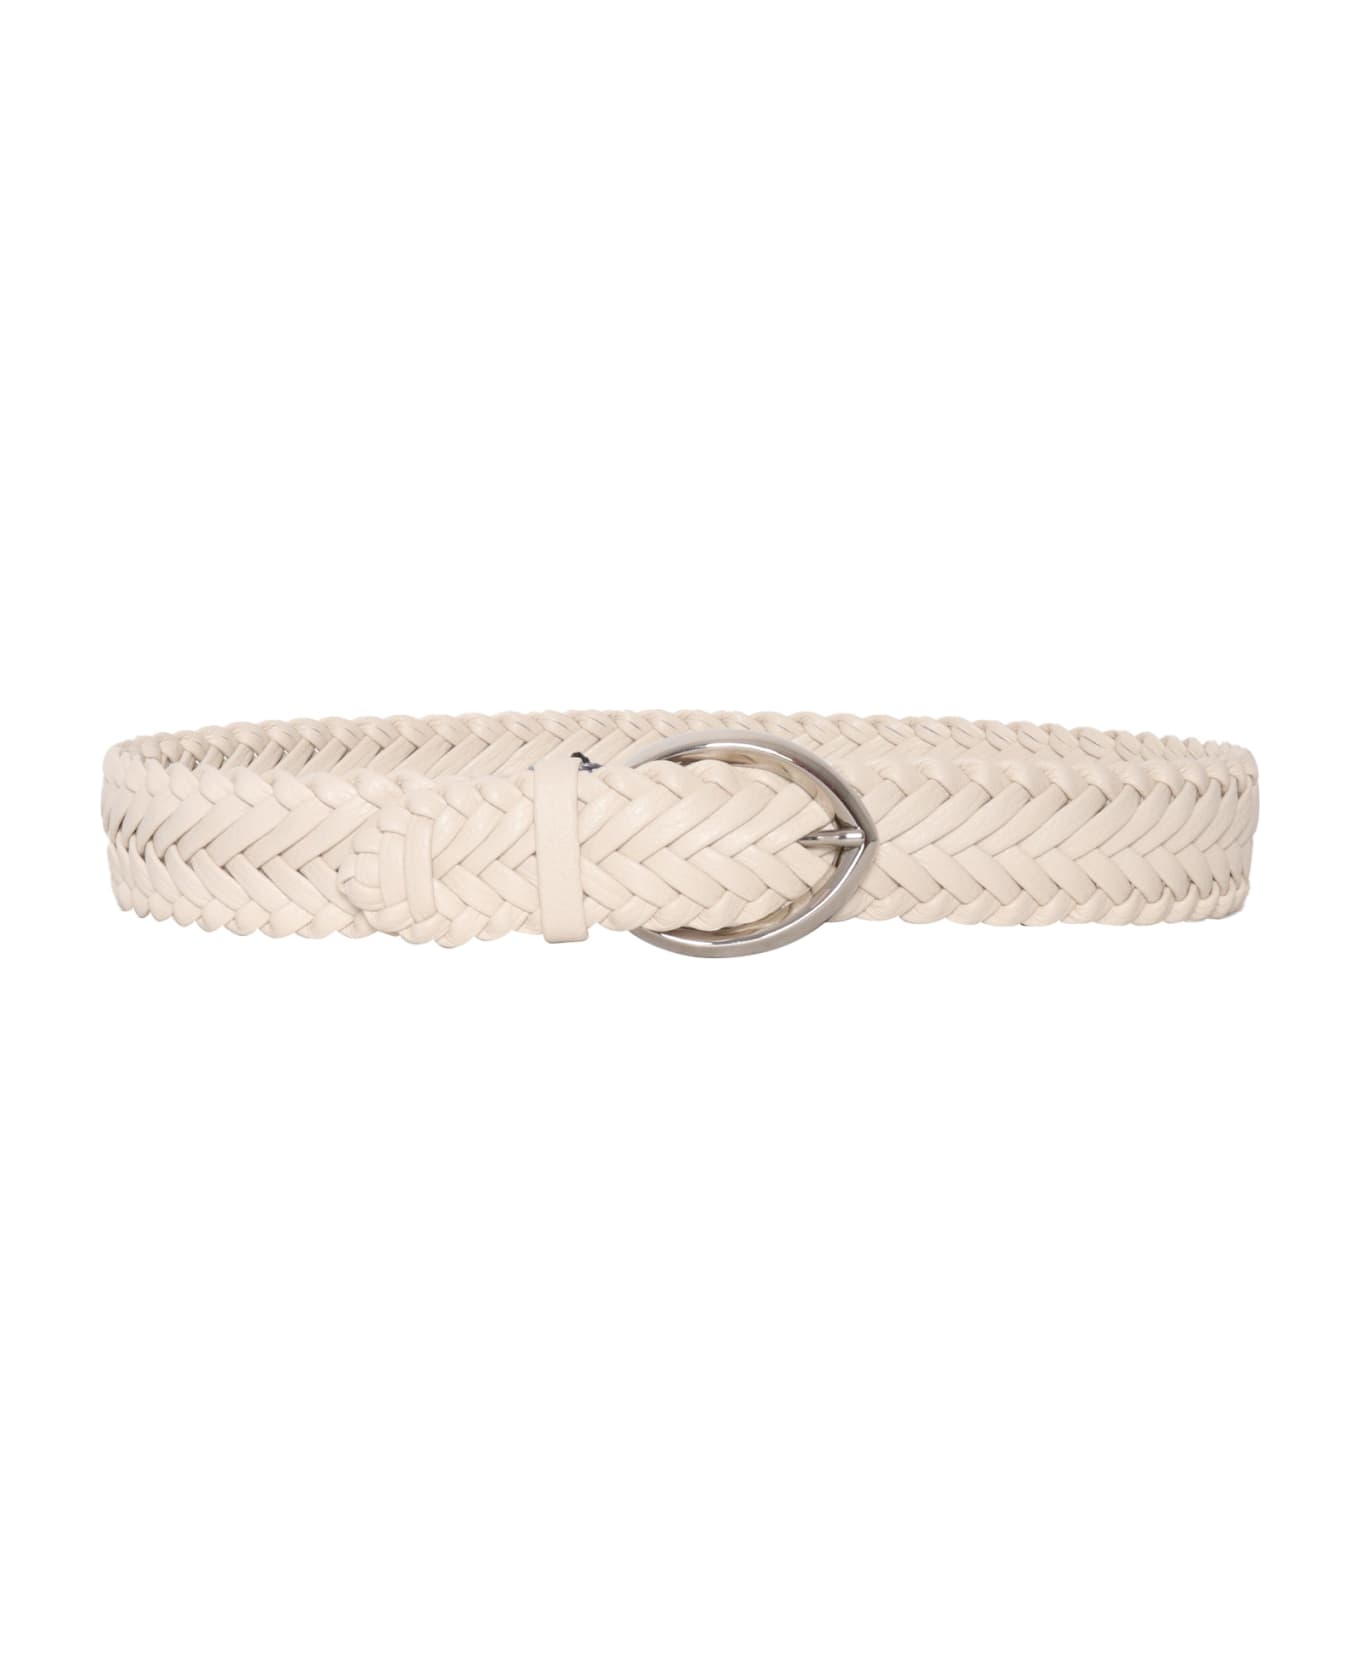 Orciani Woven Leather Belt - WHITE